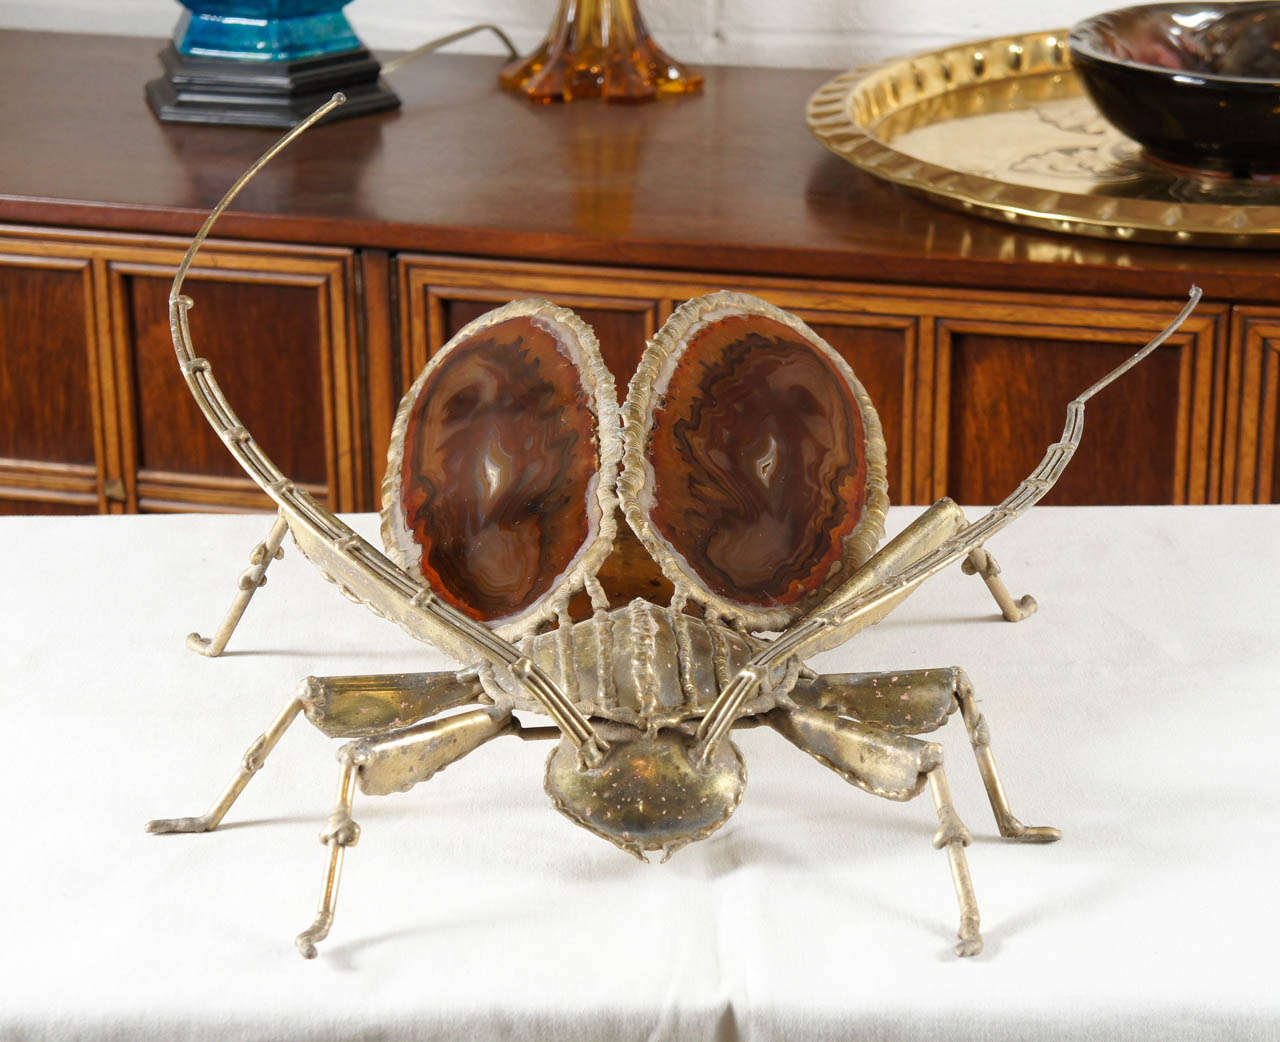 Here is an amazing beetle sconce by Jacques Duval-Brasseur.
The body is bronze and the wings are made of Agate.
This fixture works as a table lamp or a sconce.